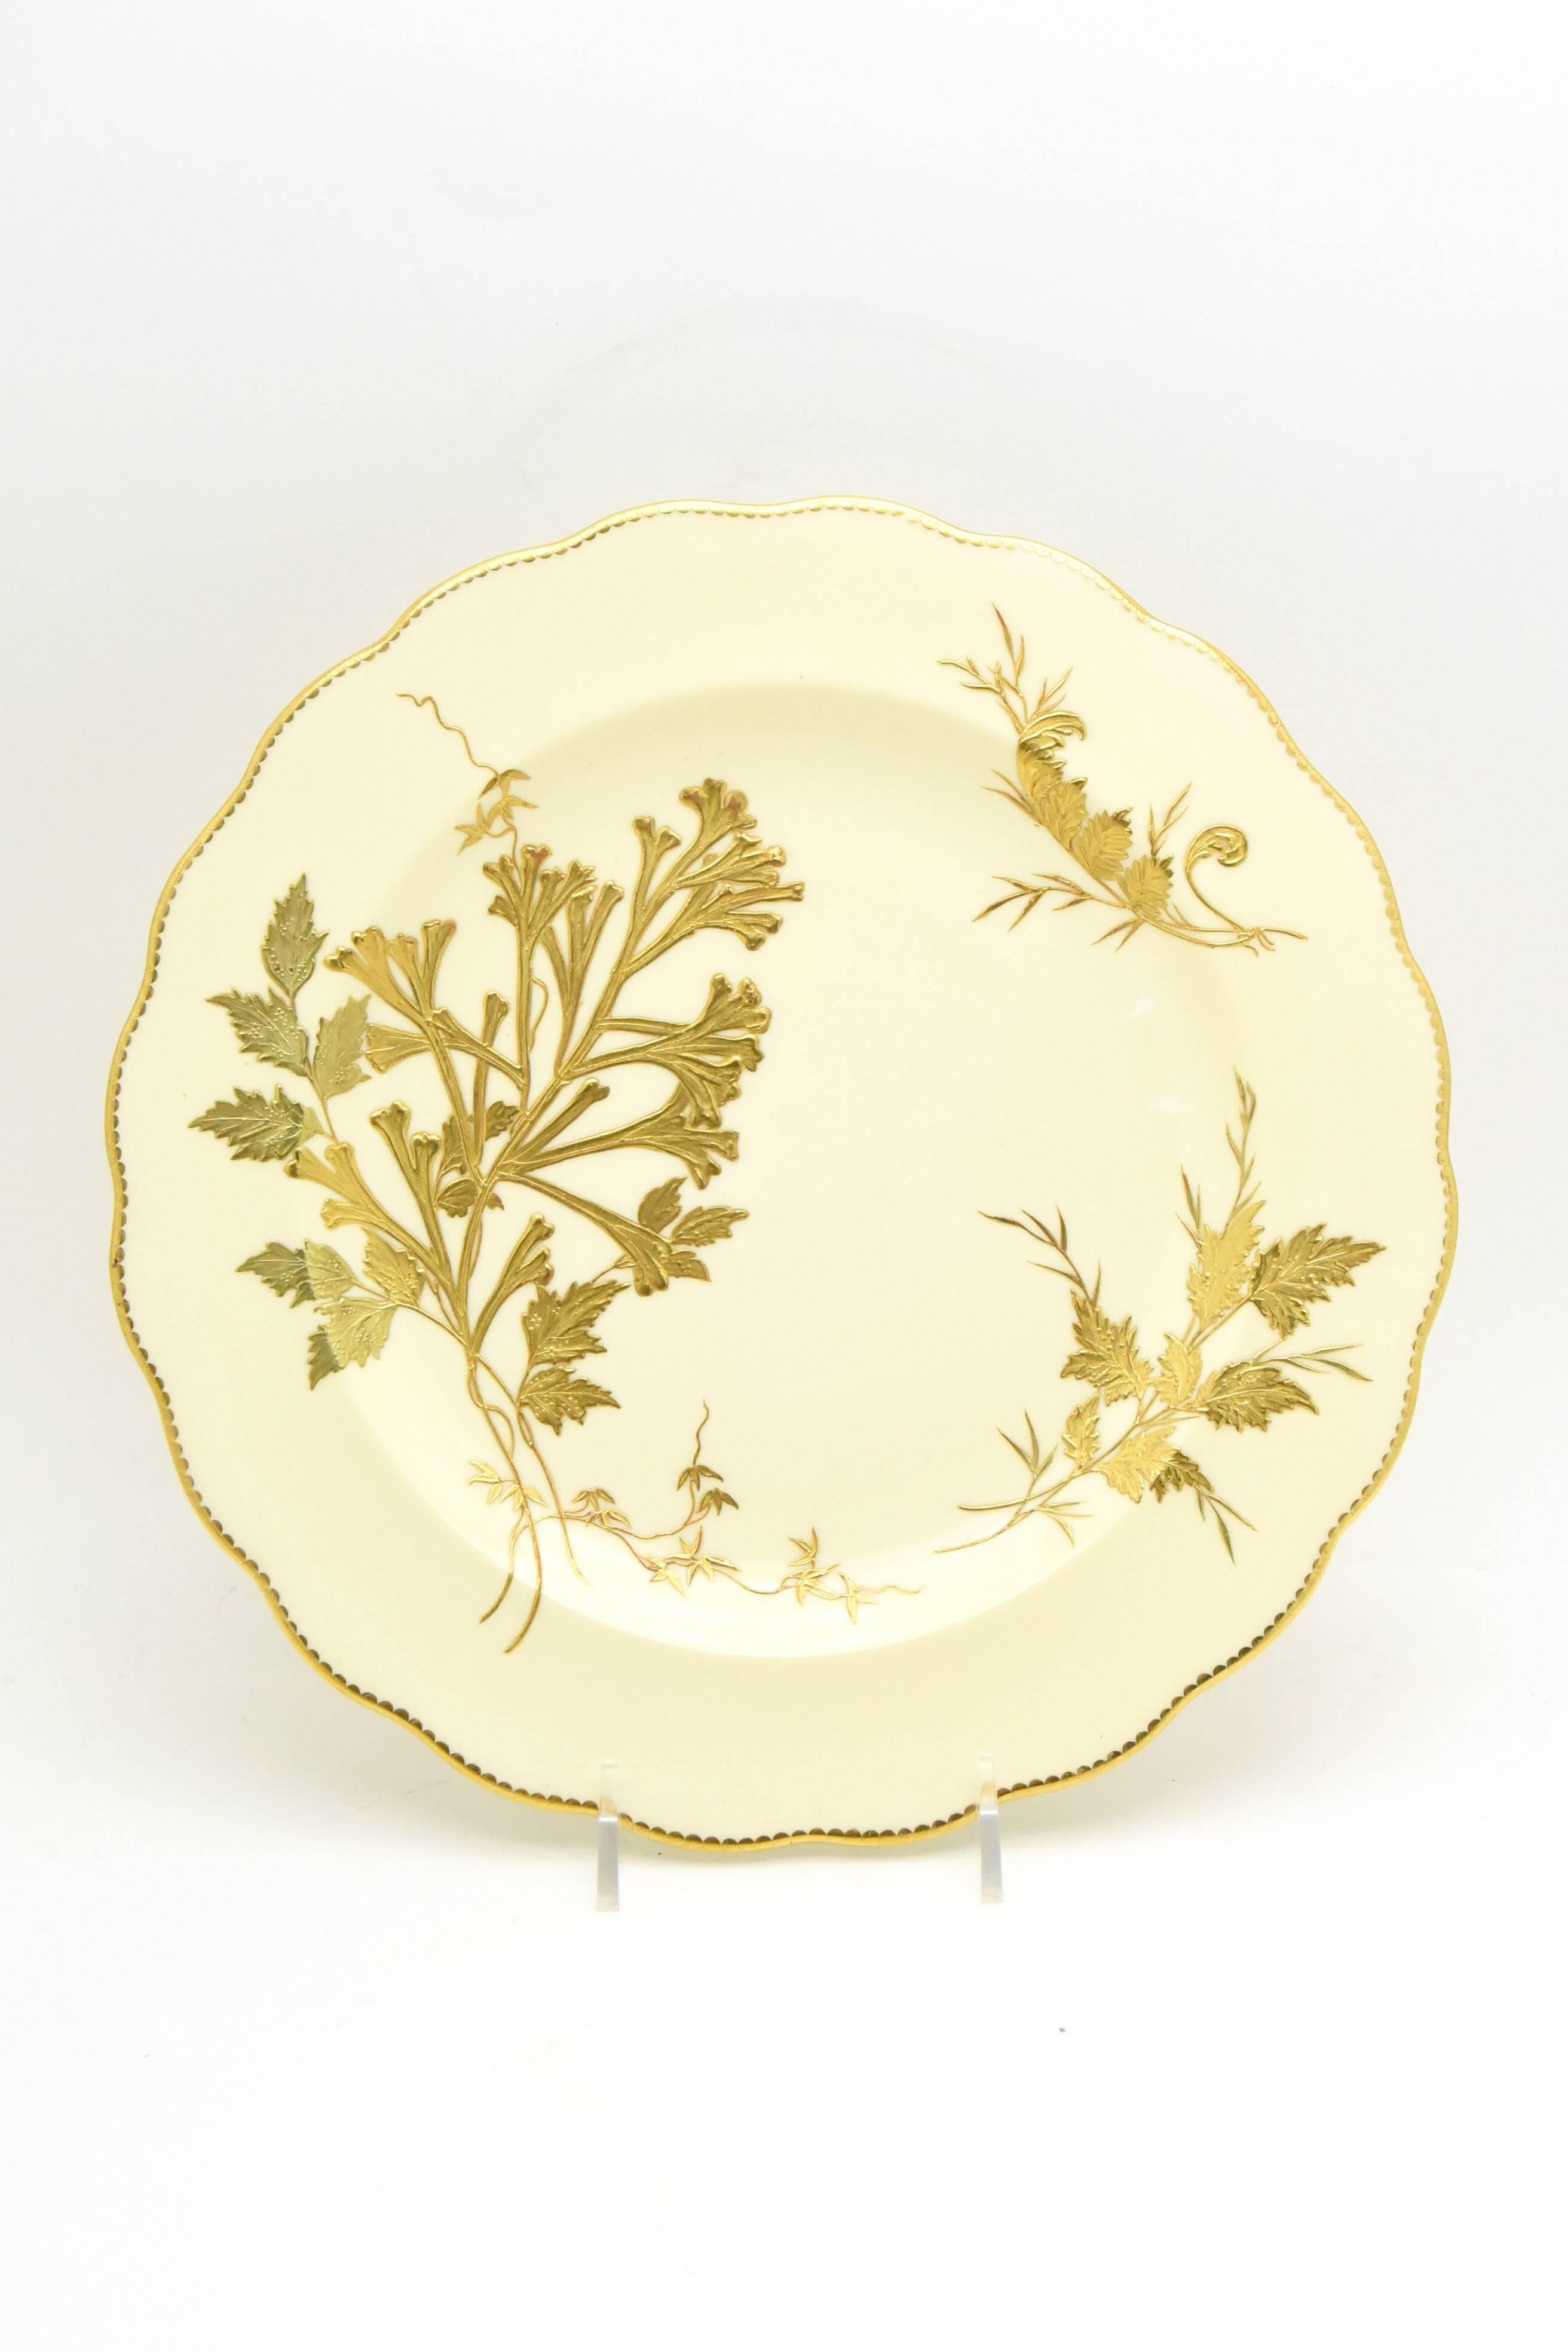 12 Tiffany 19th Century Aesthetic Movement Ivory and Raised Gold Fern Plates 1